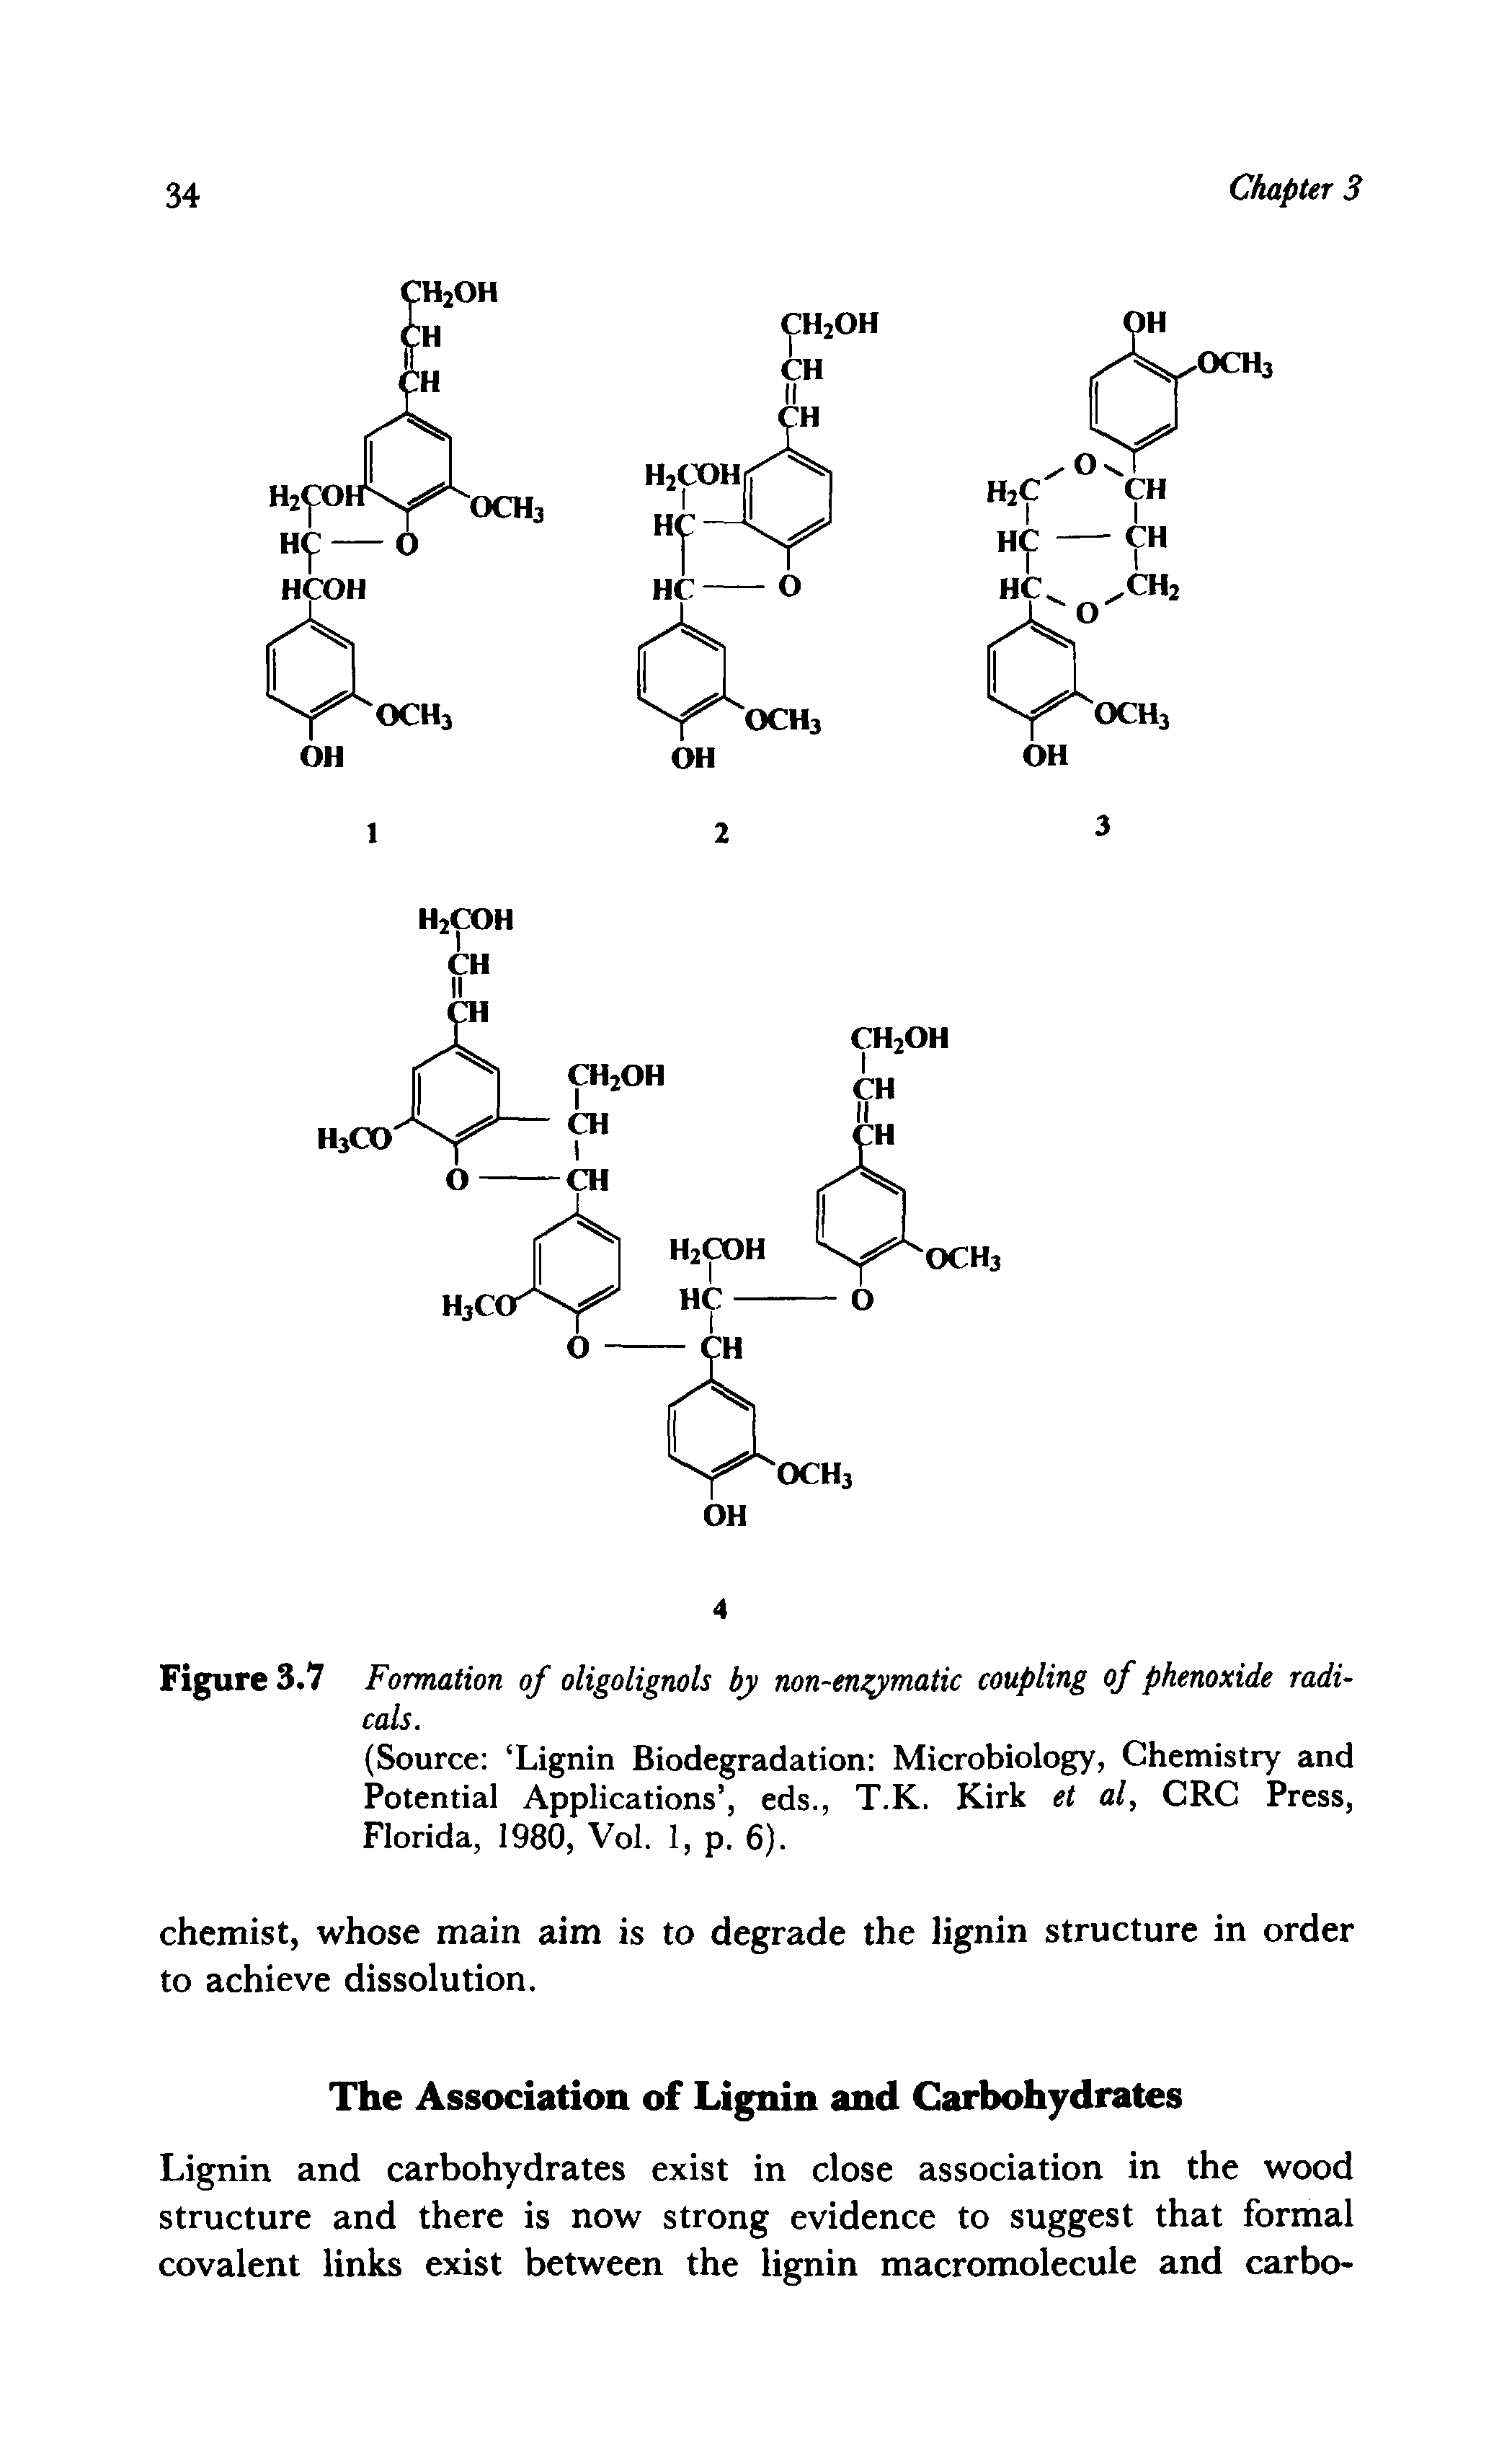 Figure 3.7 Formation of oligolignols by non-enzymatic coupling of phenoxide radicals.